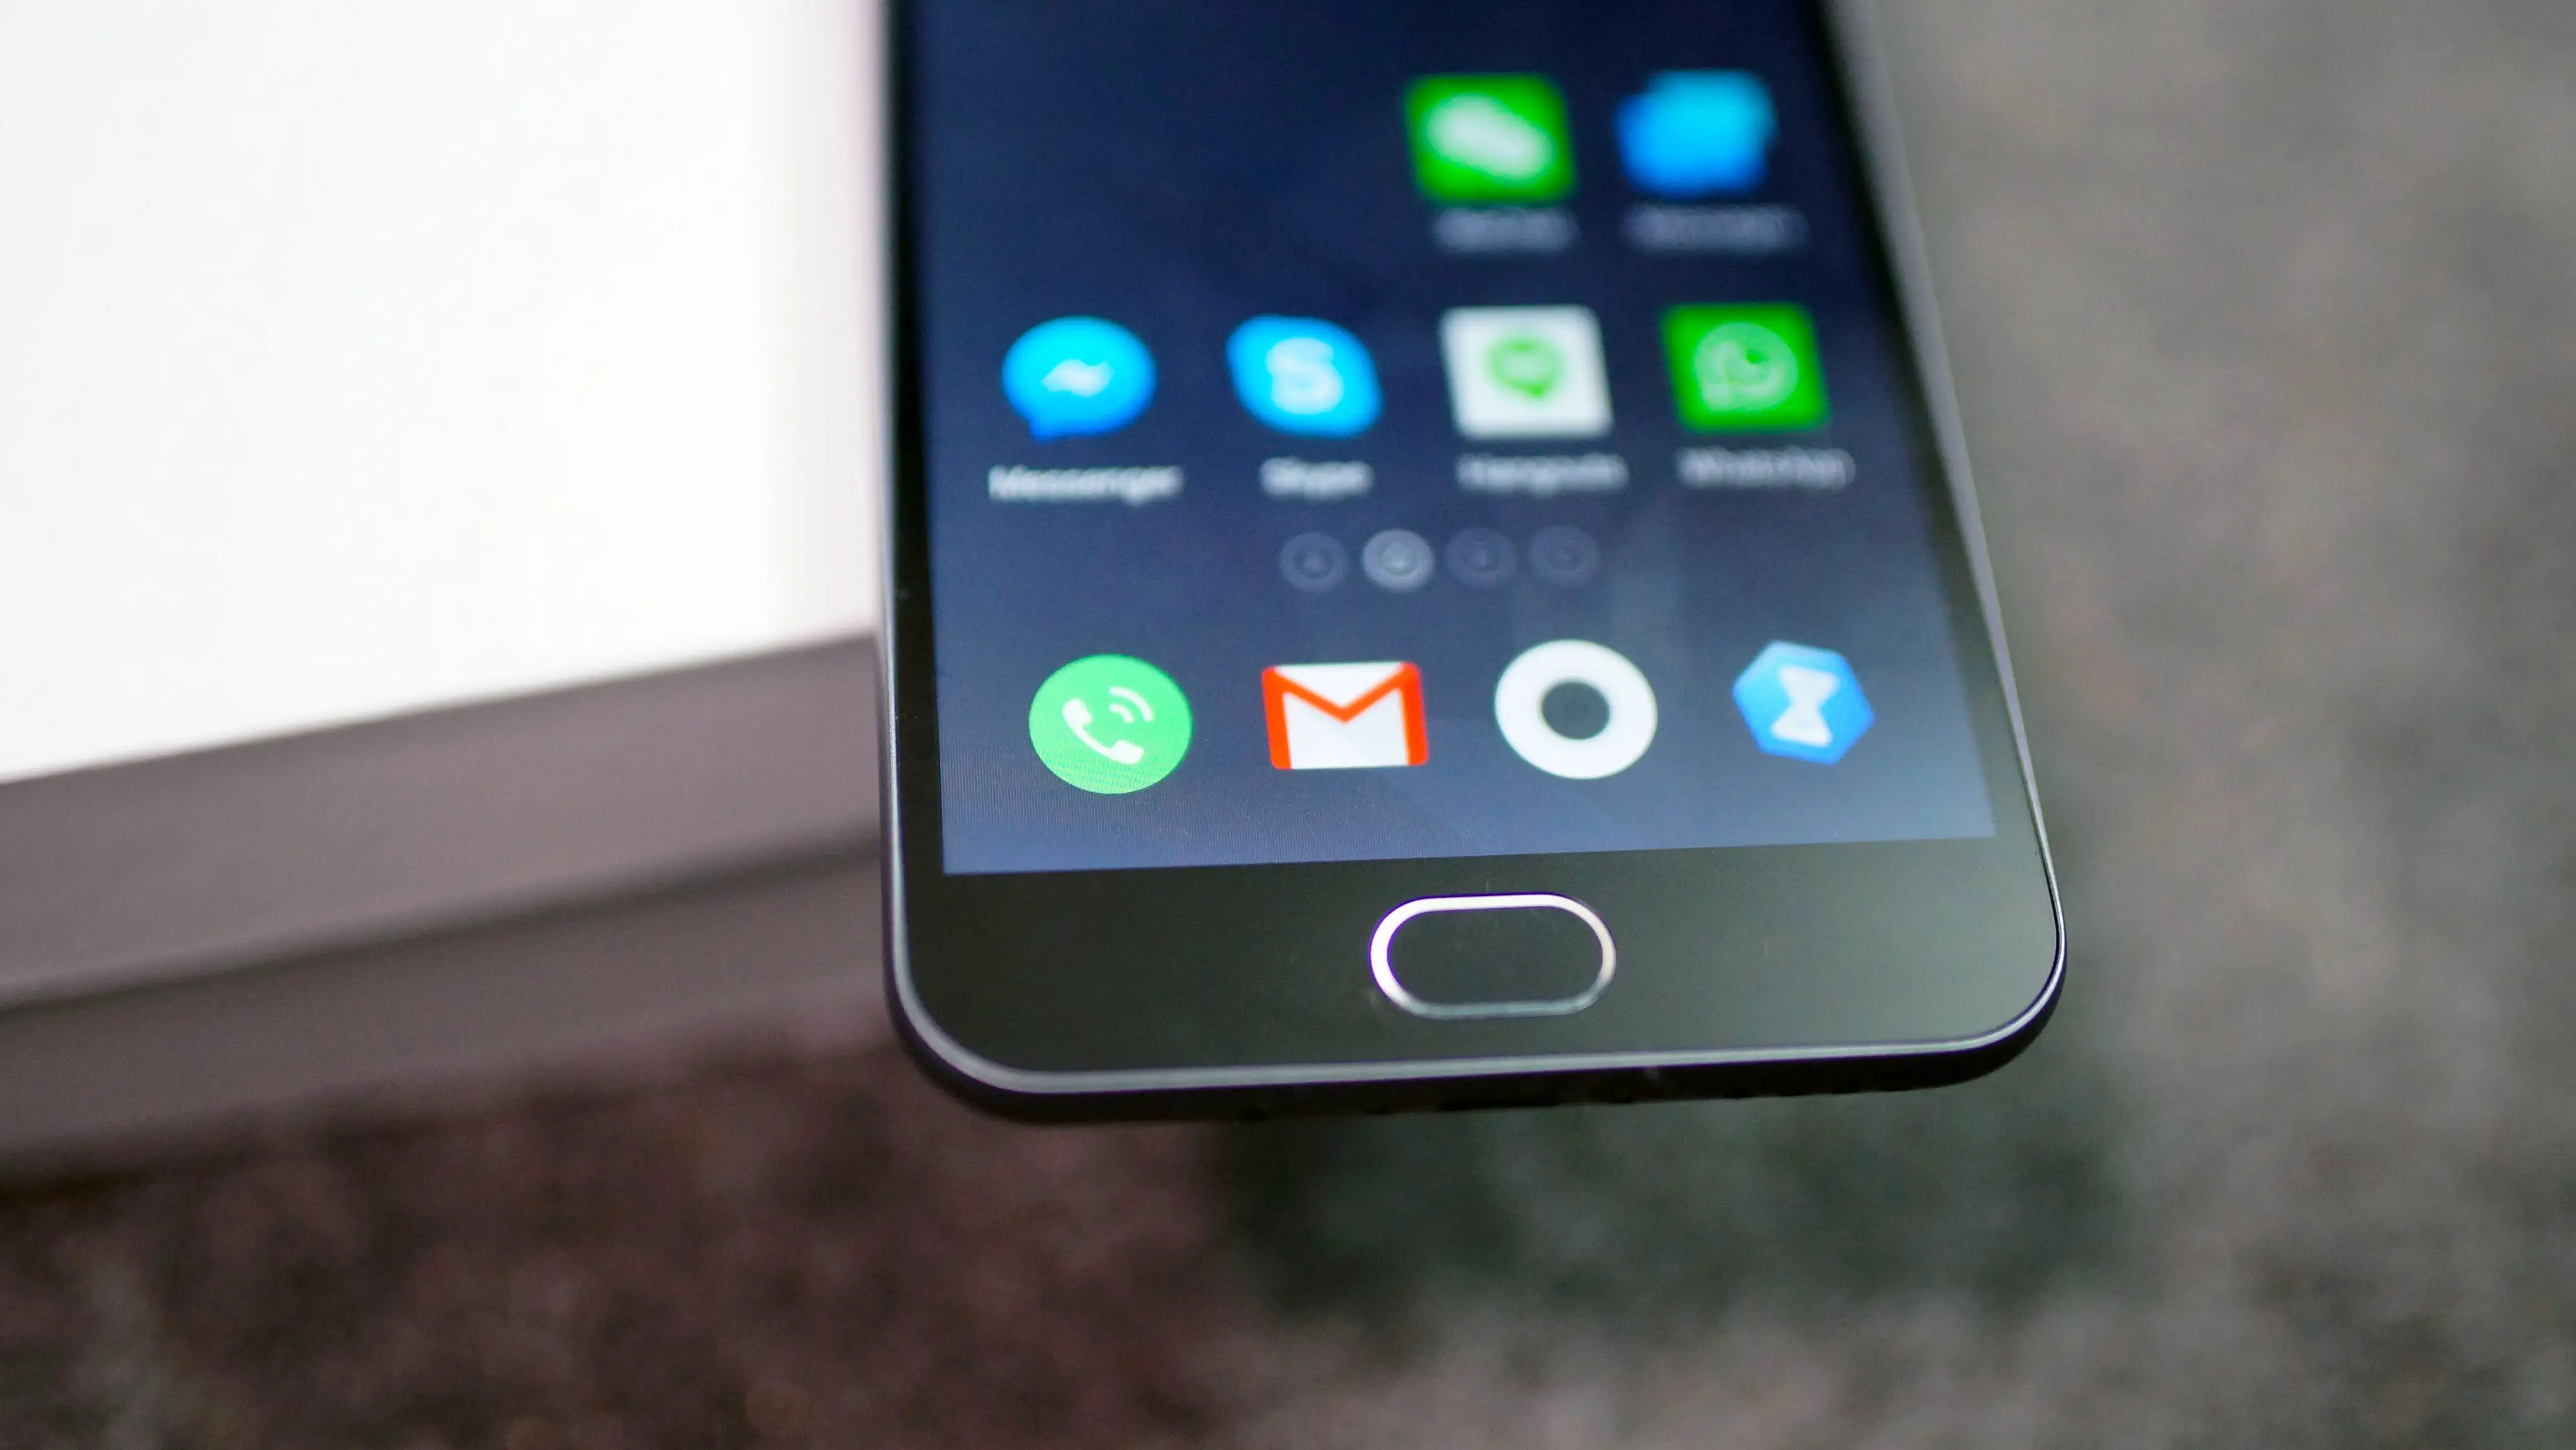 How to Flash Stock Rom on Meizu M2